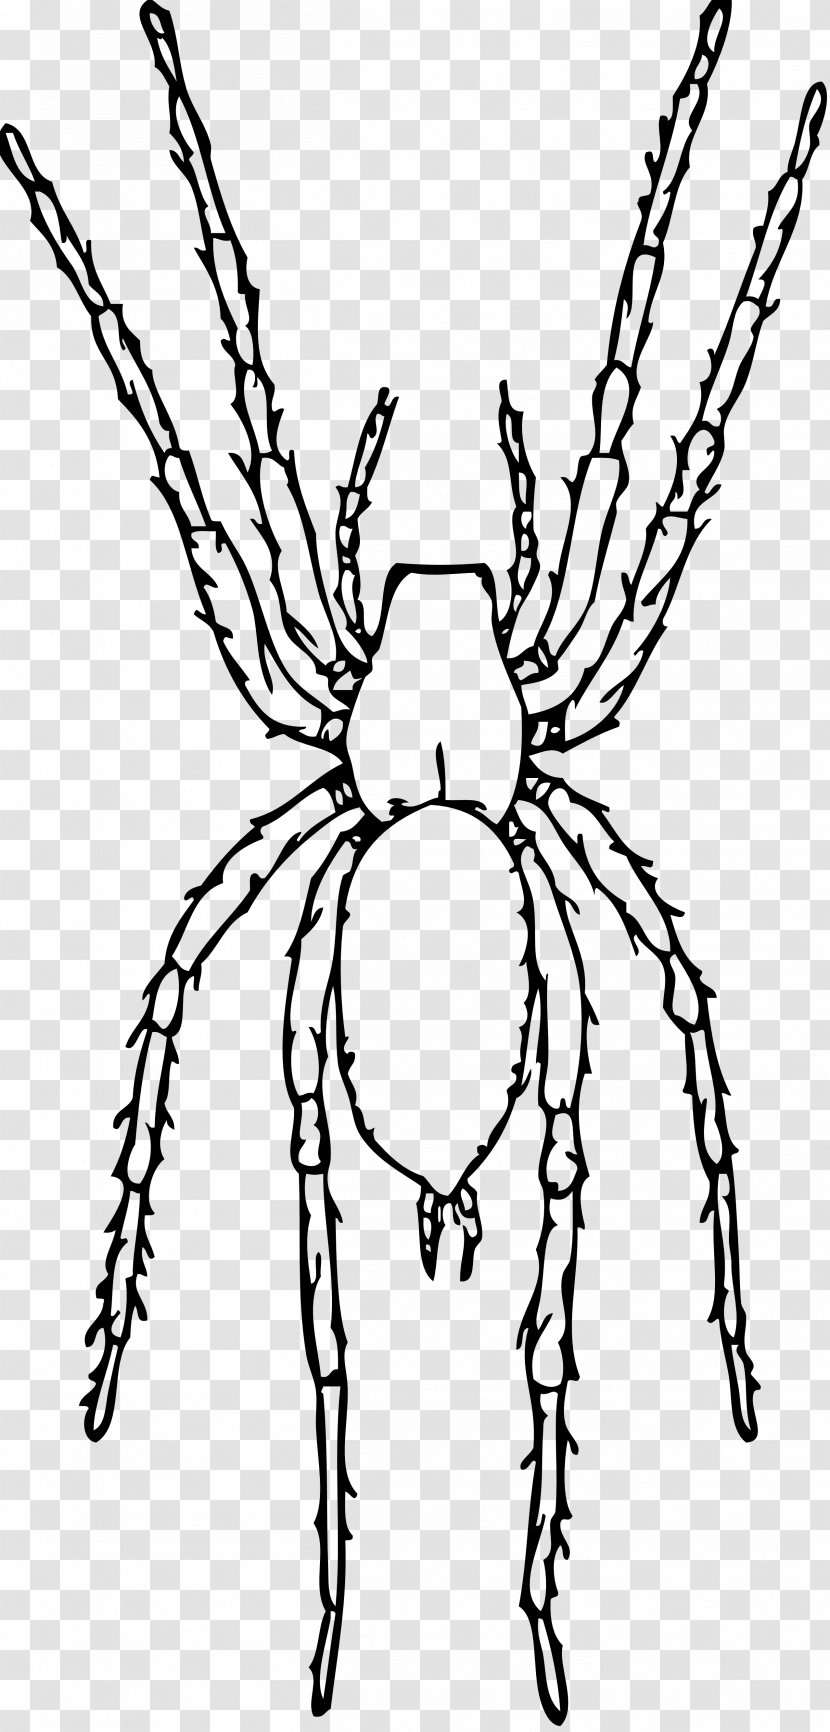 Spider Drawing Clip Art - Organism - Spiders Transparent PNG